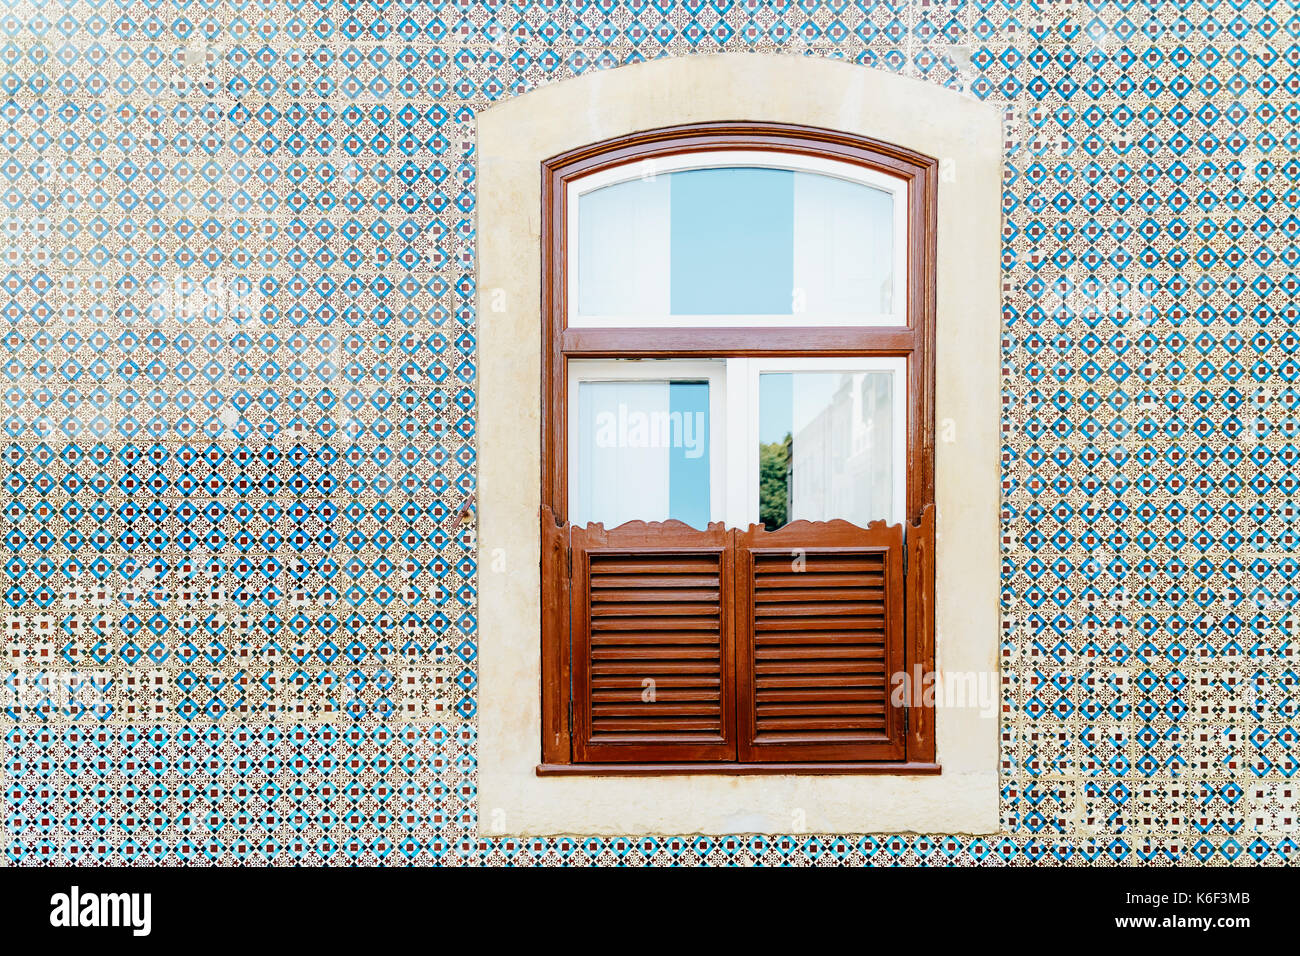 Vintage Wooden Window On Blue Tile Wall In Lisbon, Portugal Stock Photo